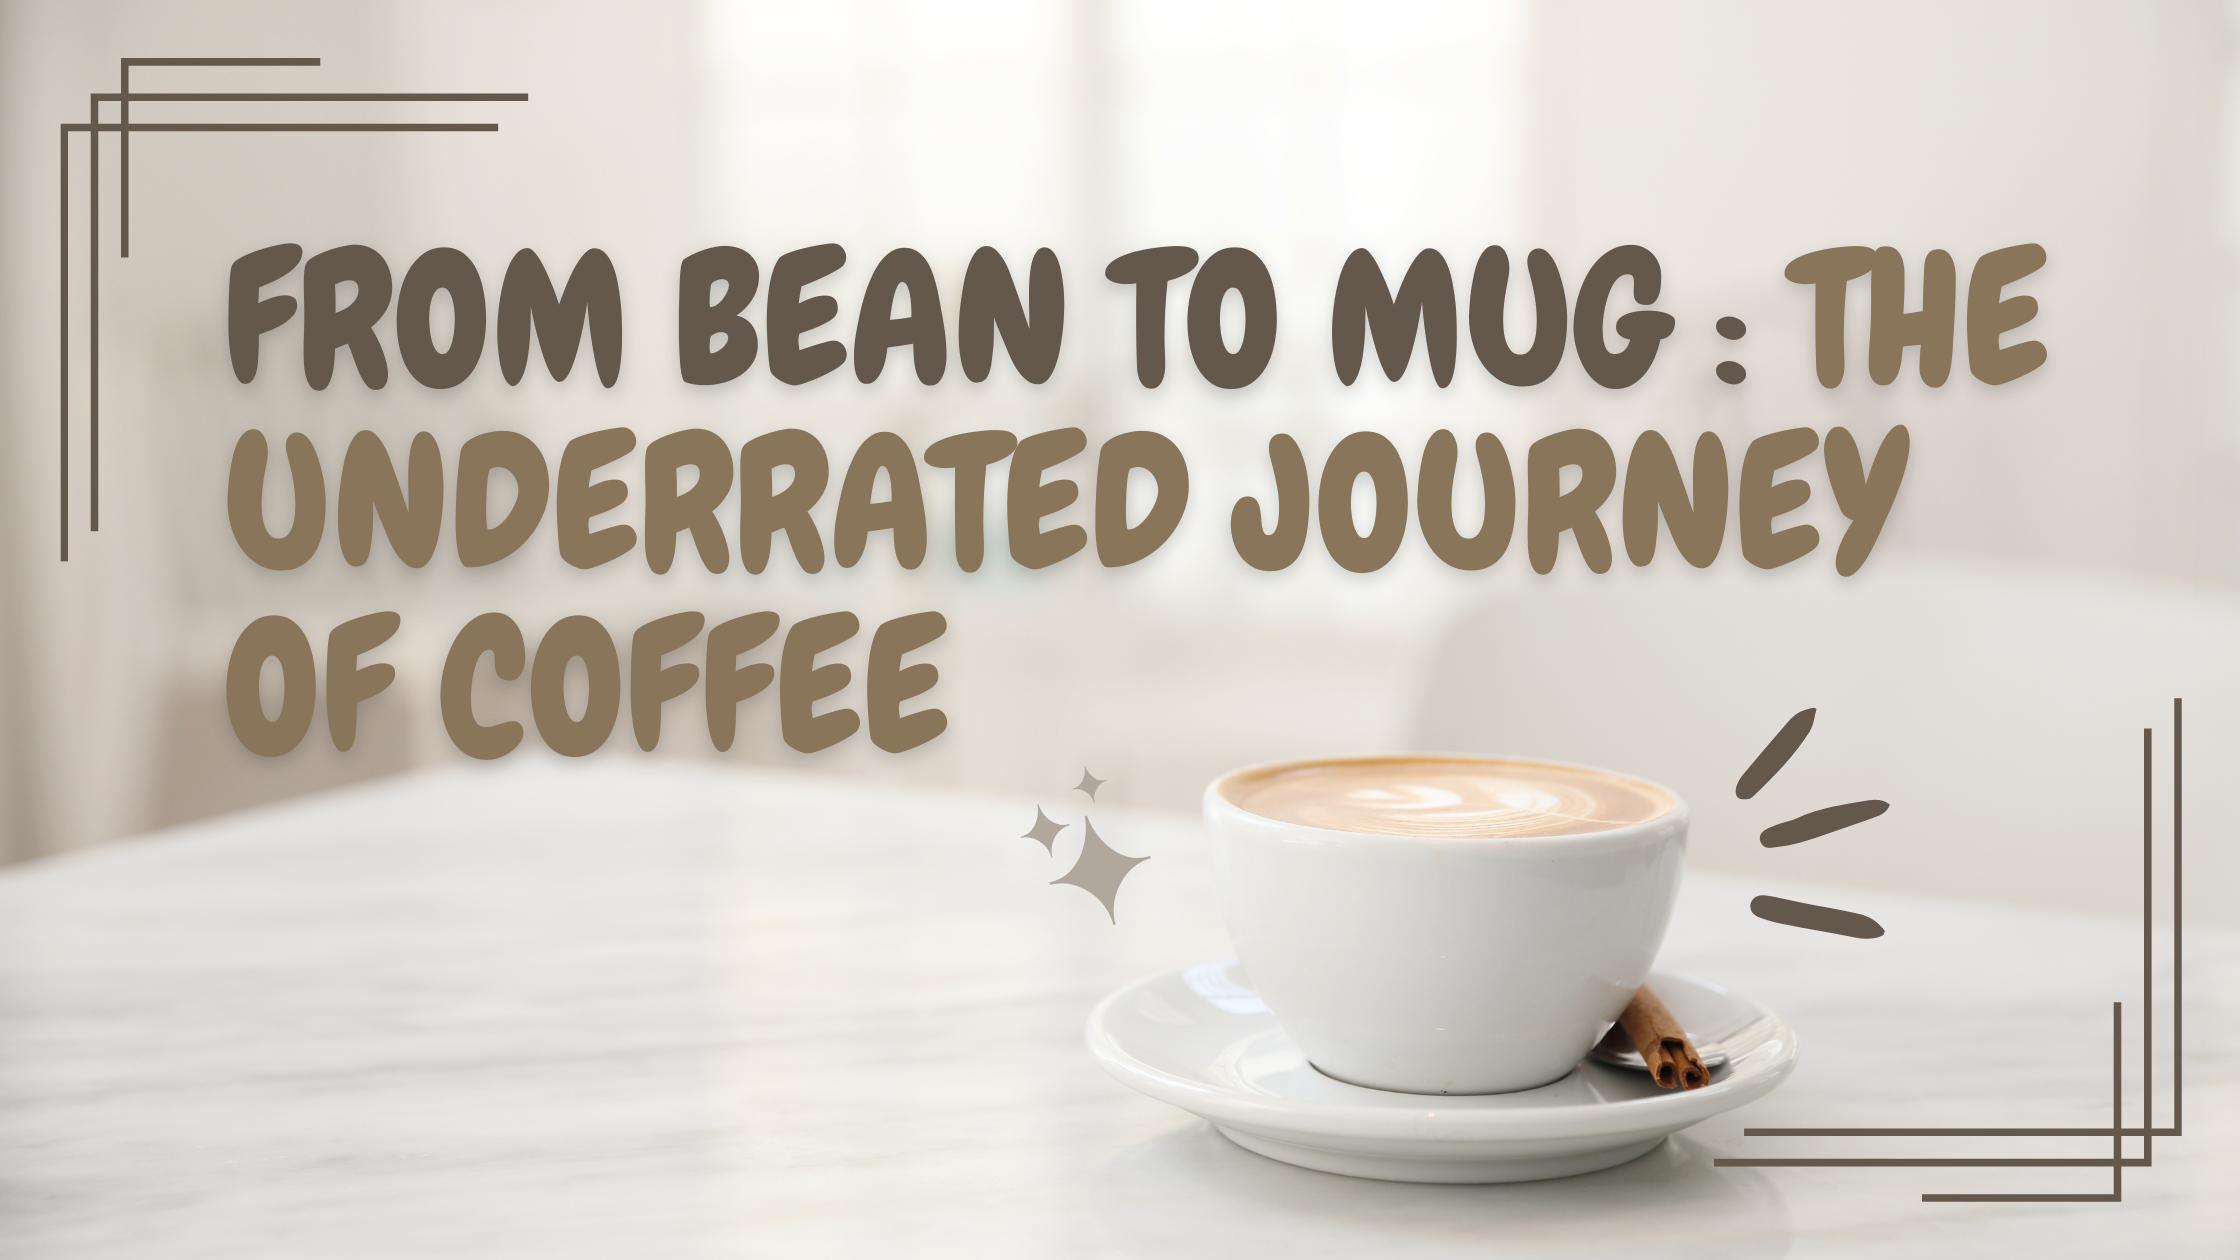 From Bean To Mug: The Underrated Journey Of Coffee